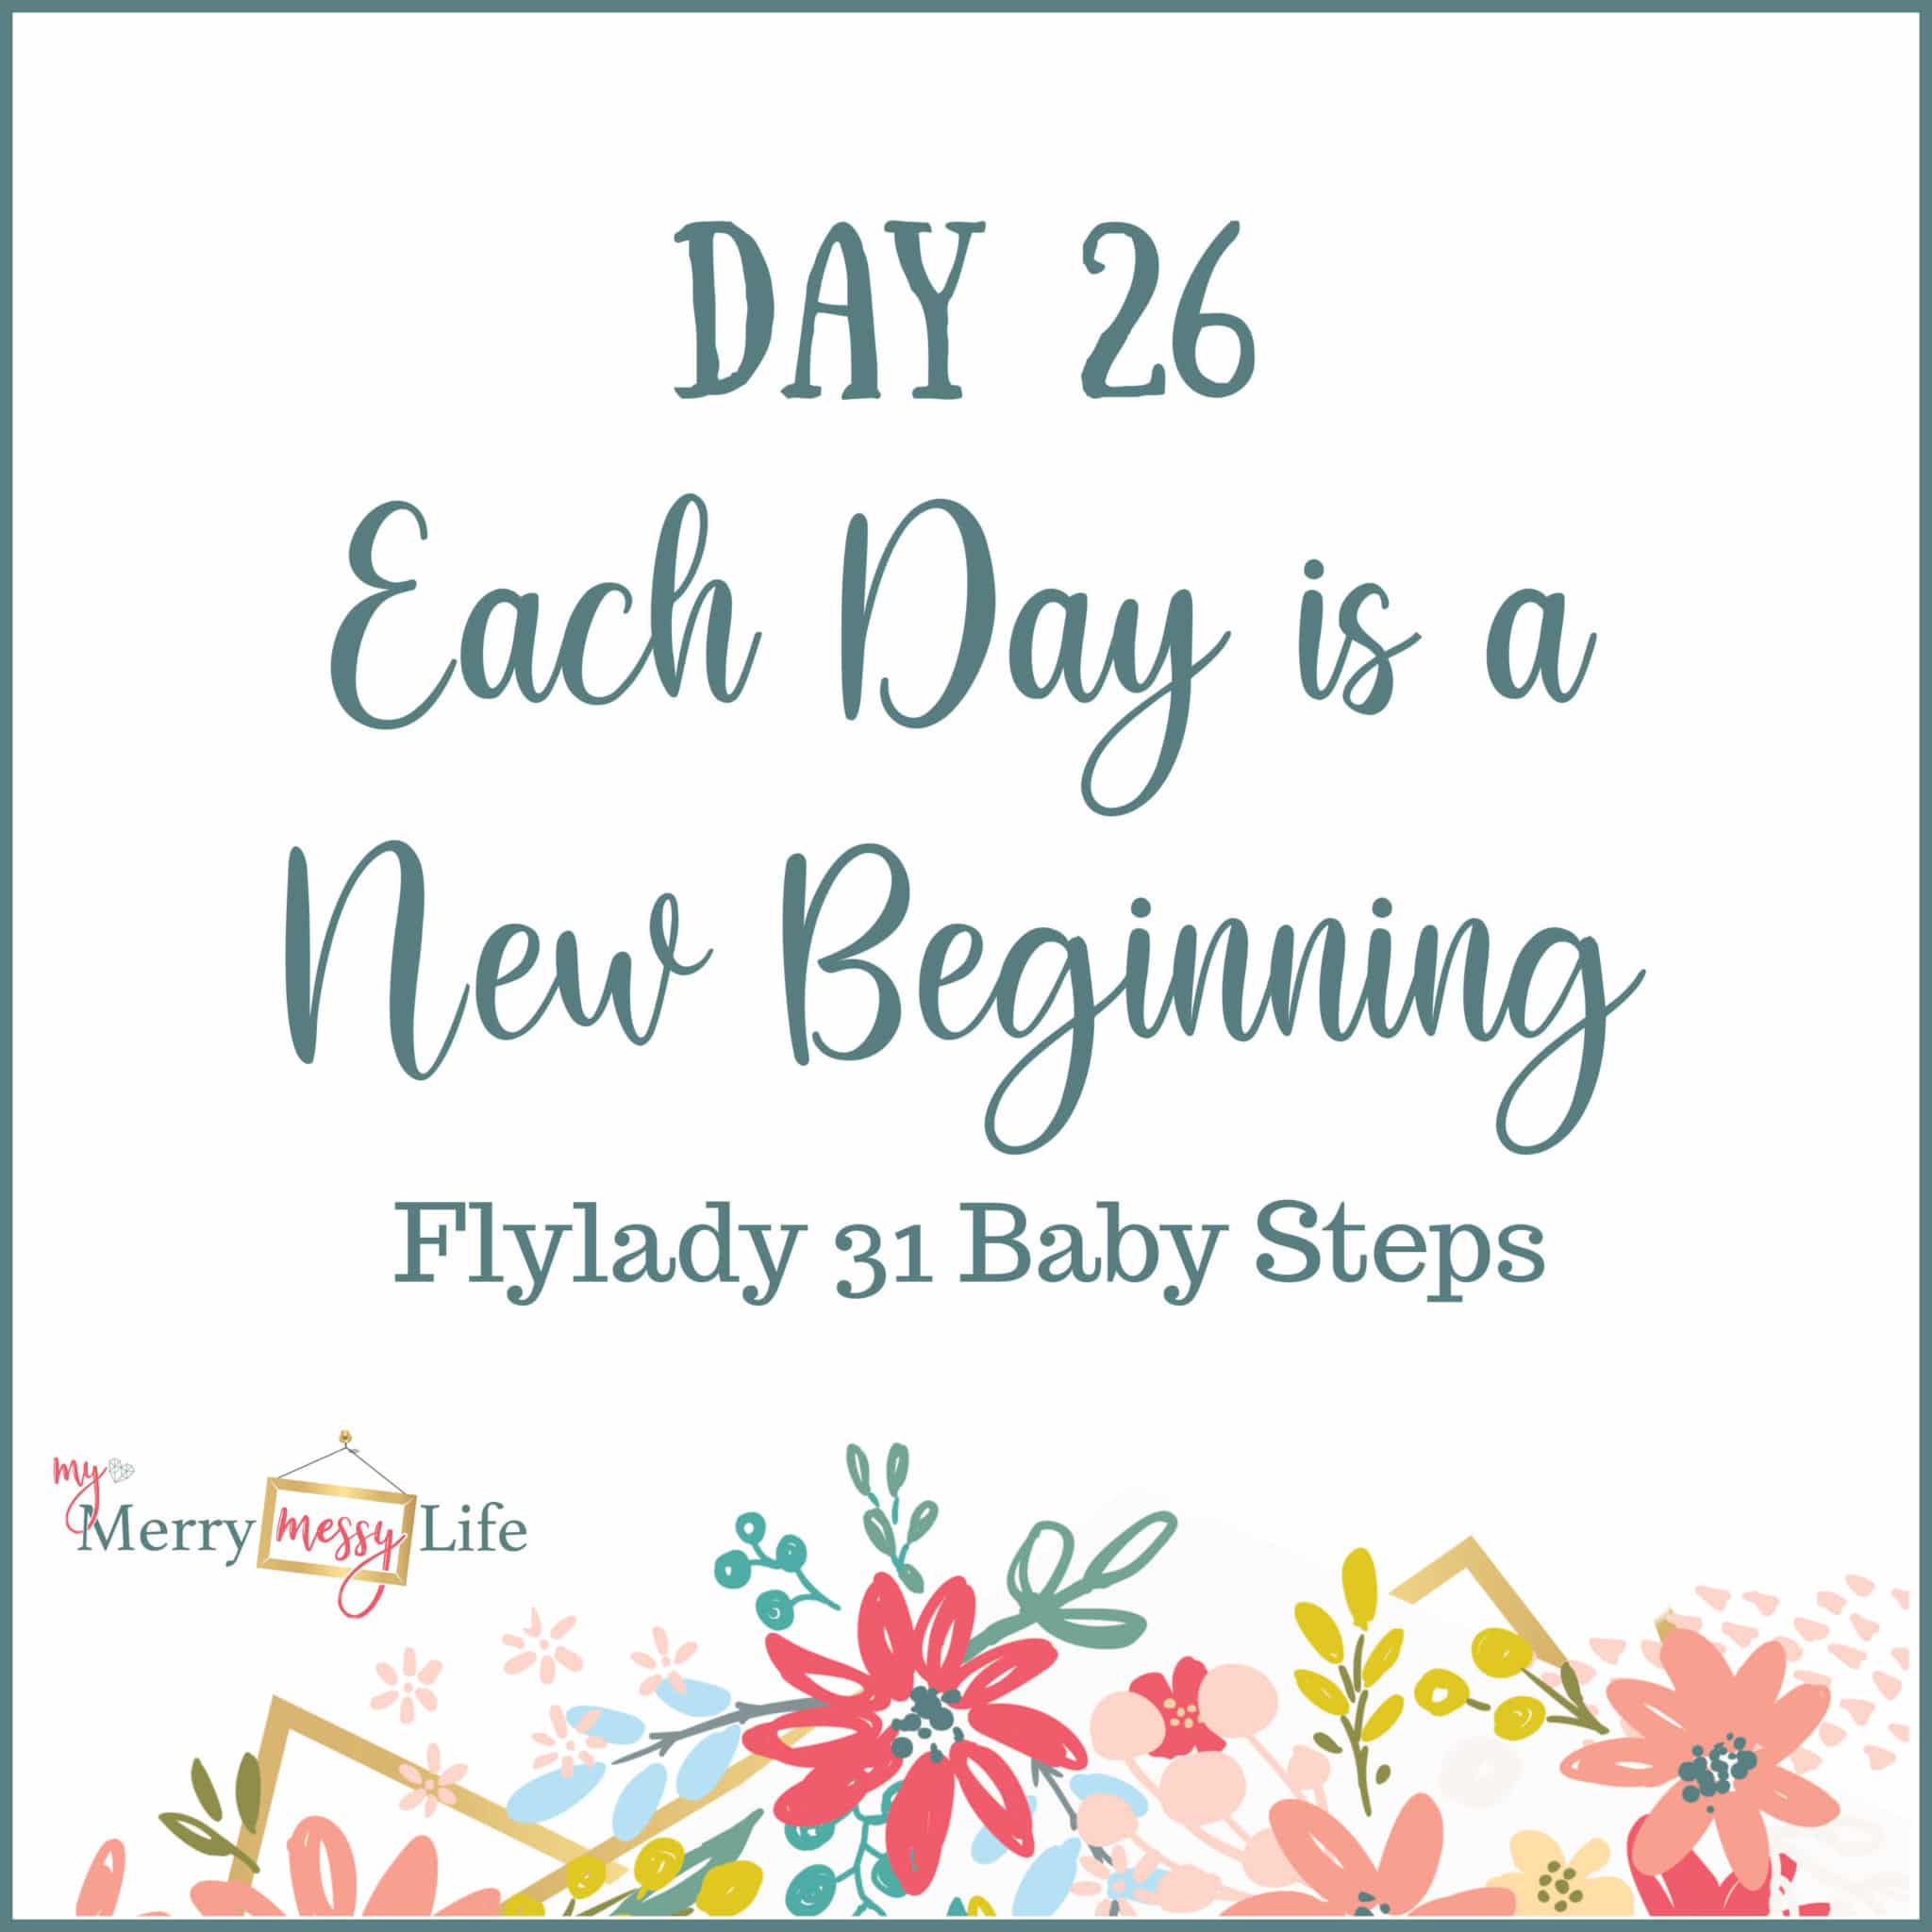 Flylady 31 Baby Steps - Day 26 - Each Day is a New Beginning